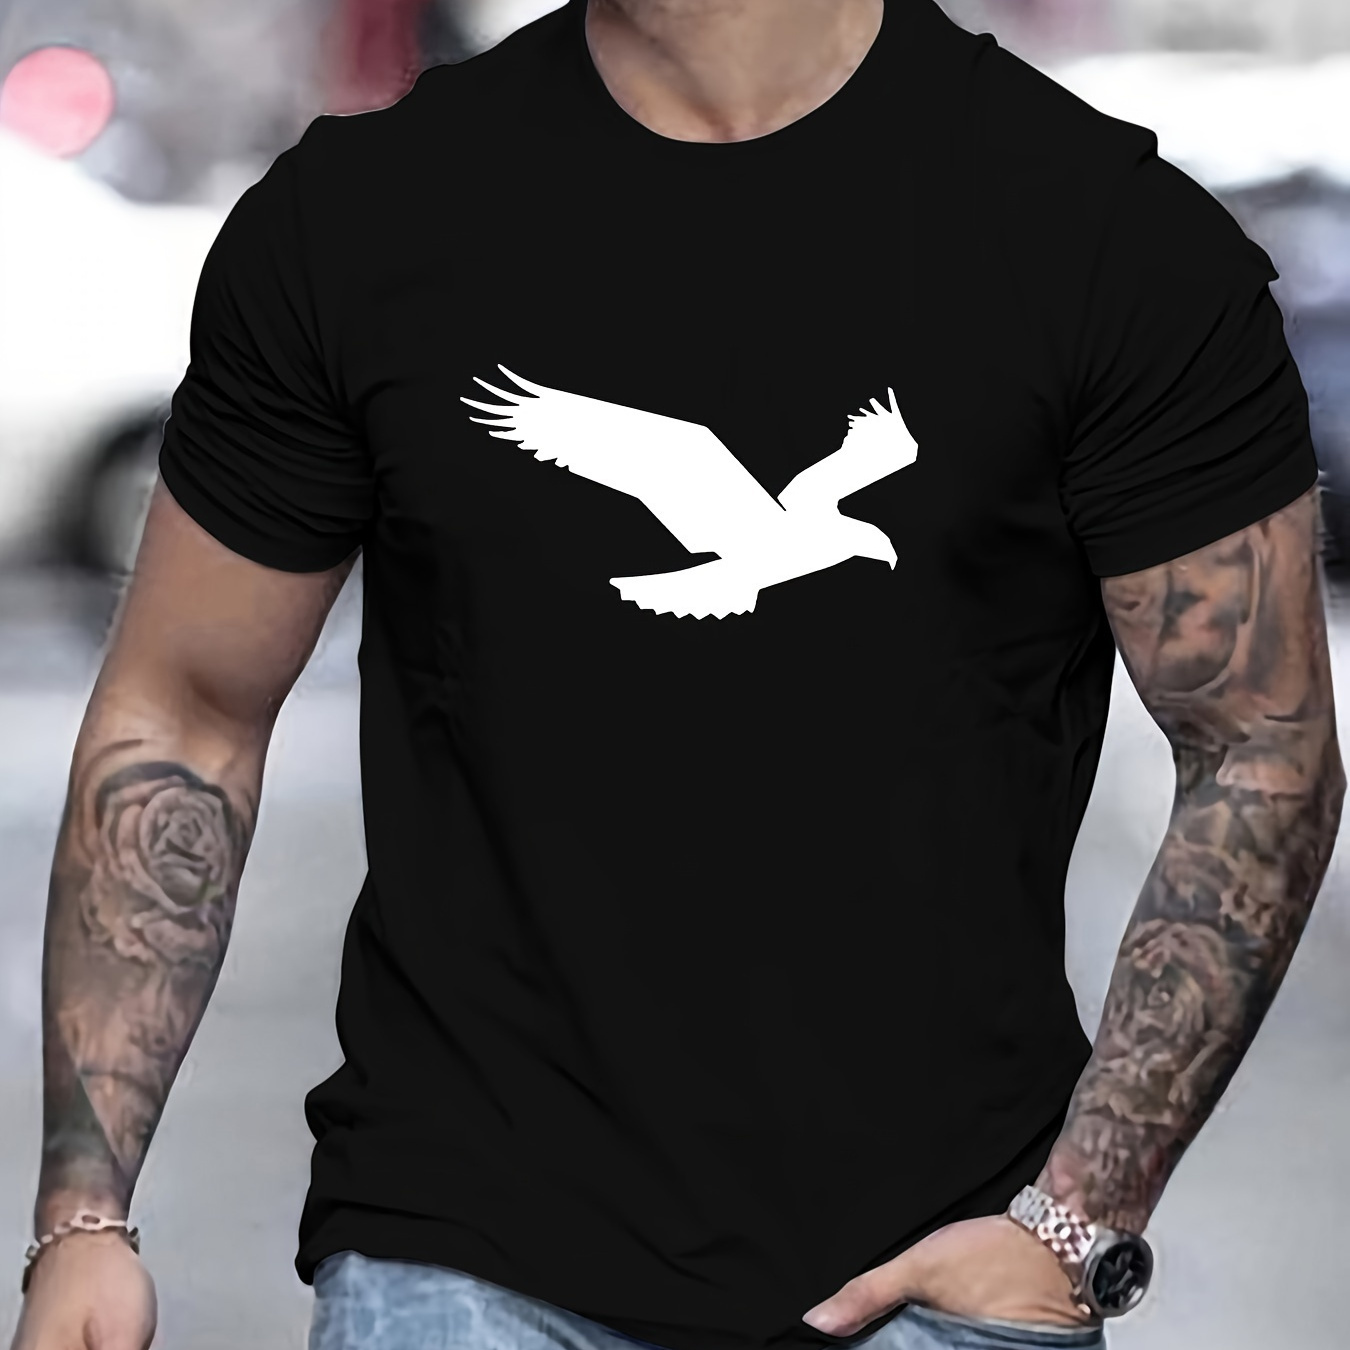 

Cool Eagle Graphic Print Men's Creative Top, Casual Short Sleeve Crew Neck T-shirt, Men's Clothing For Summer Outdoor